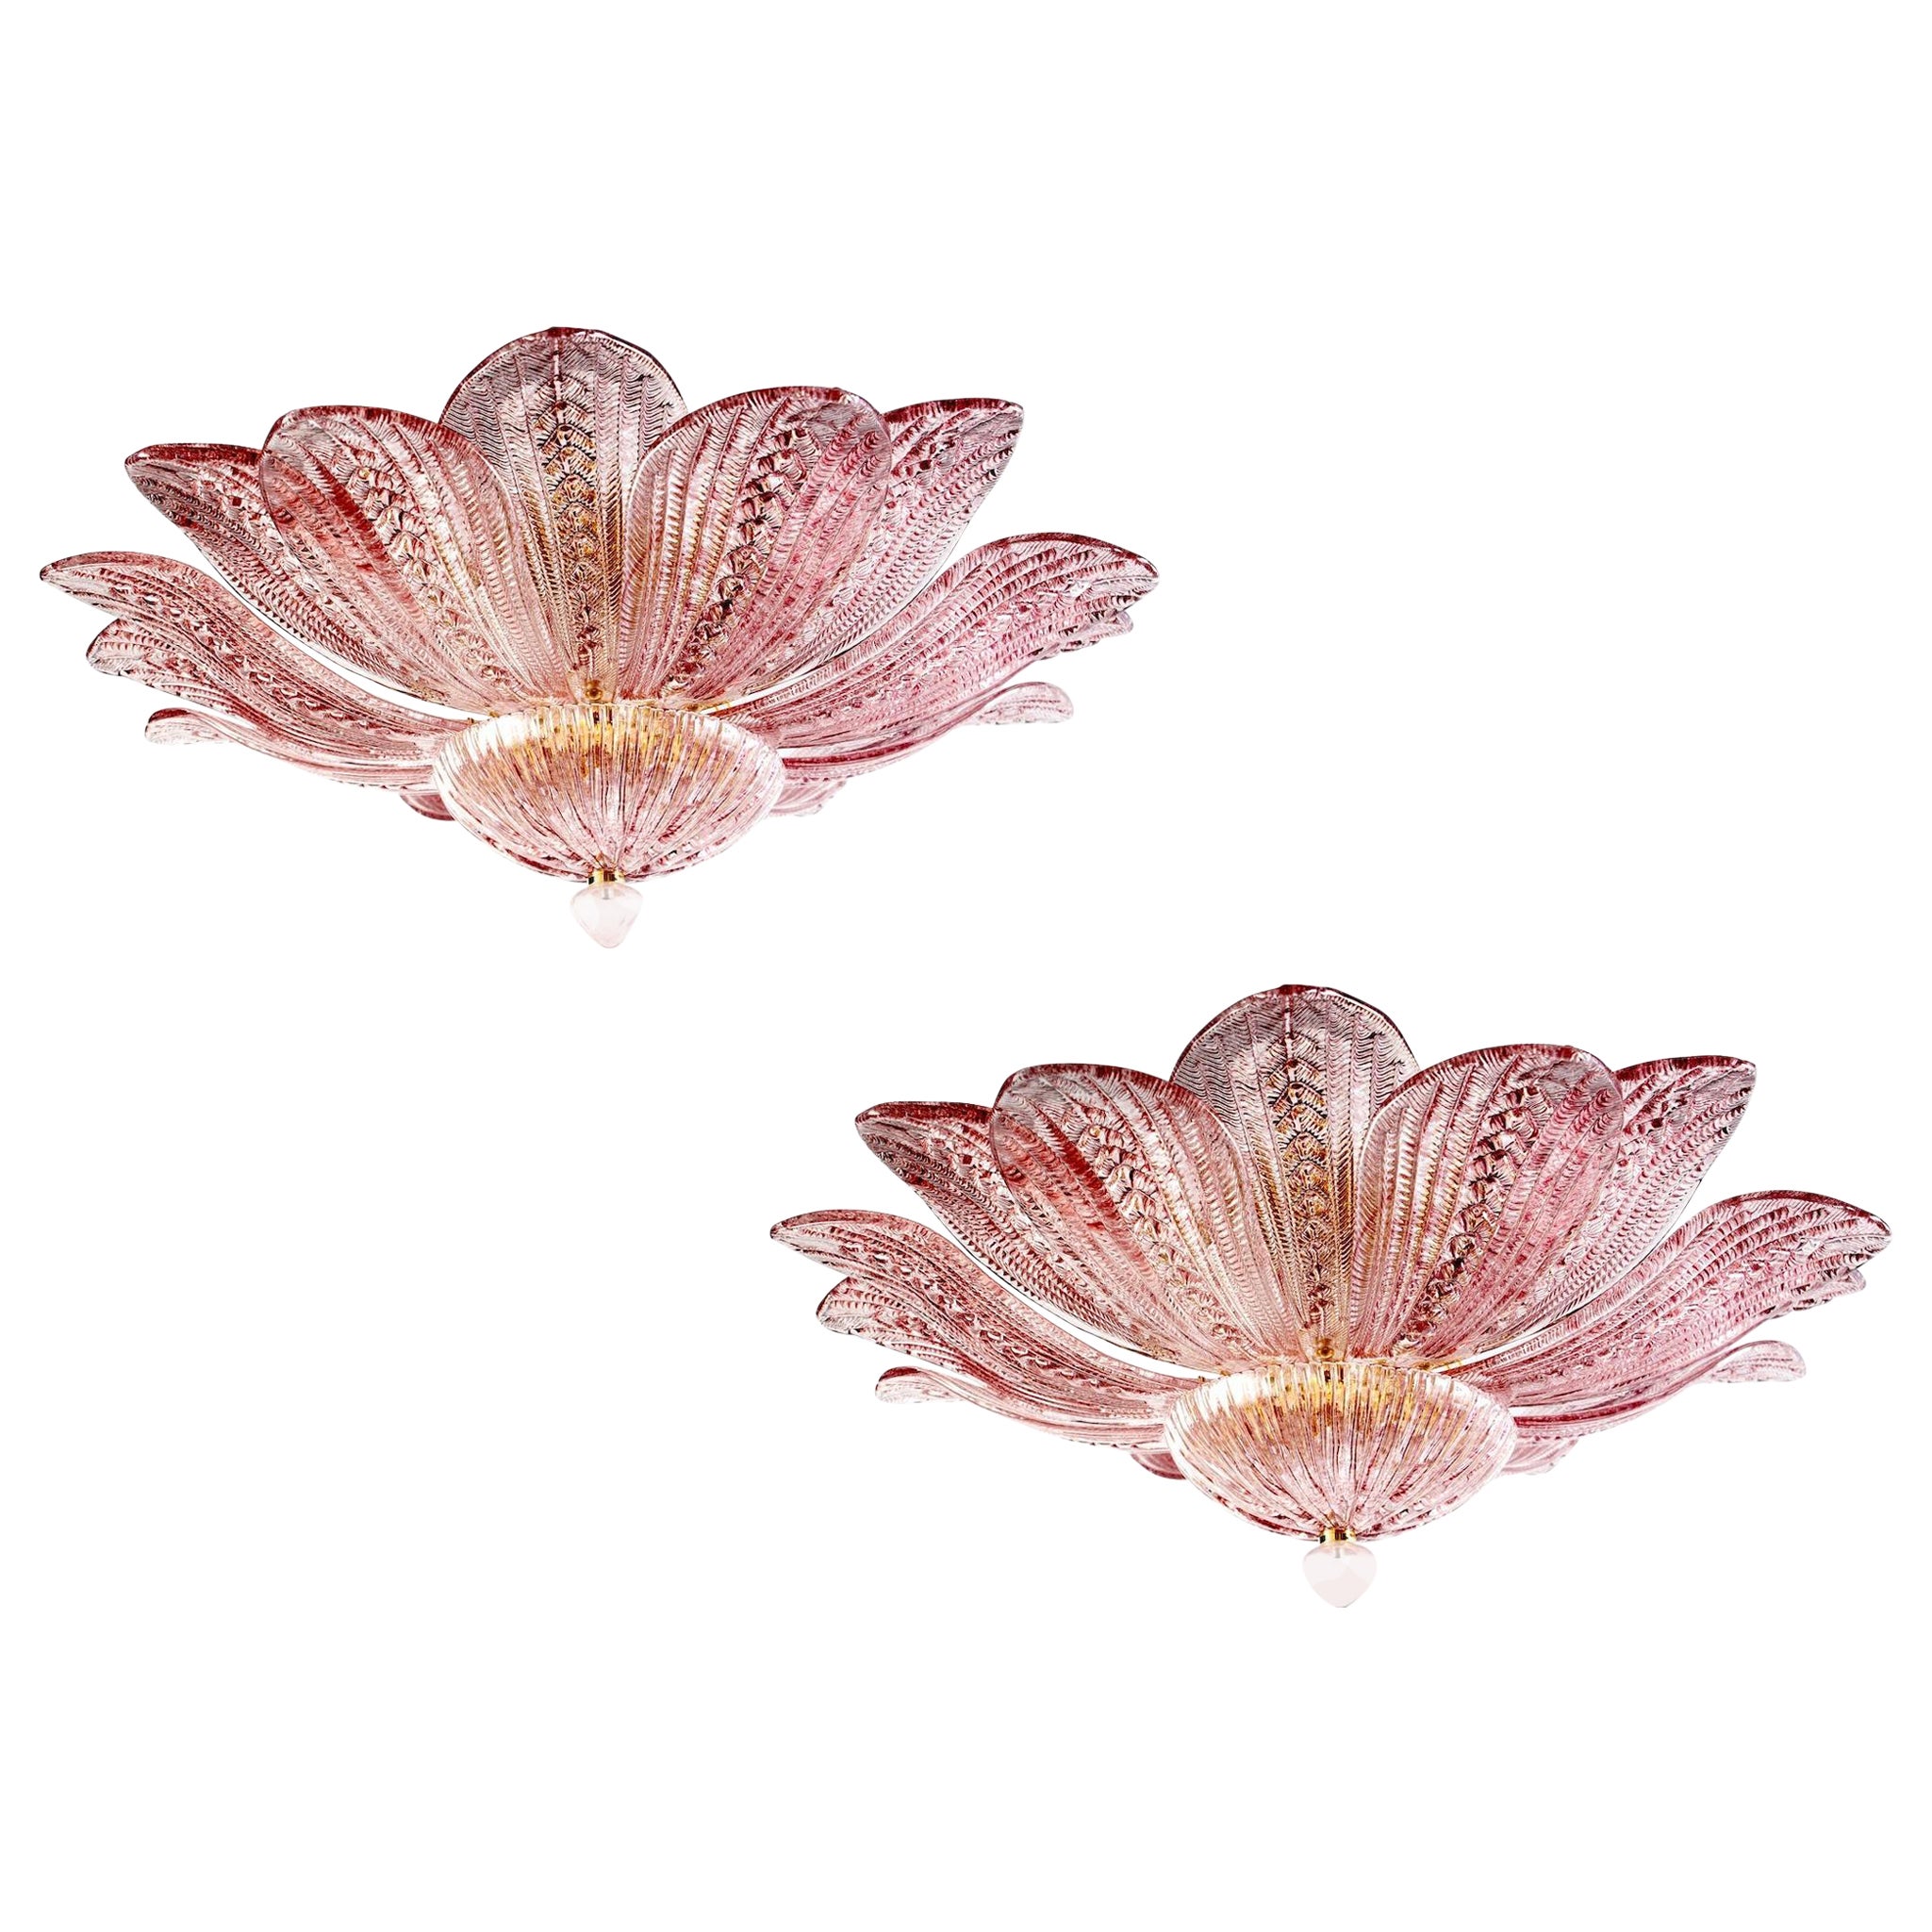 Charming Pink Amethyst Murano Glass Leave Ceiling Light or Chandelier For Sale 4